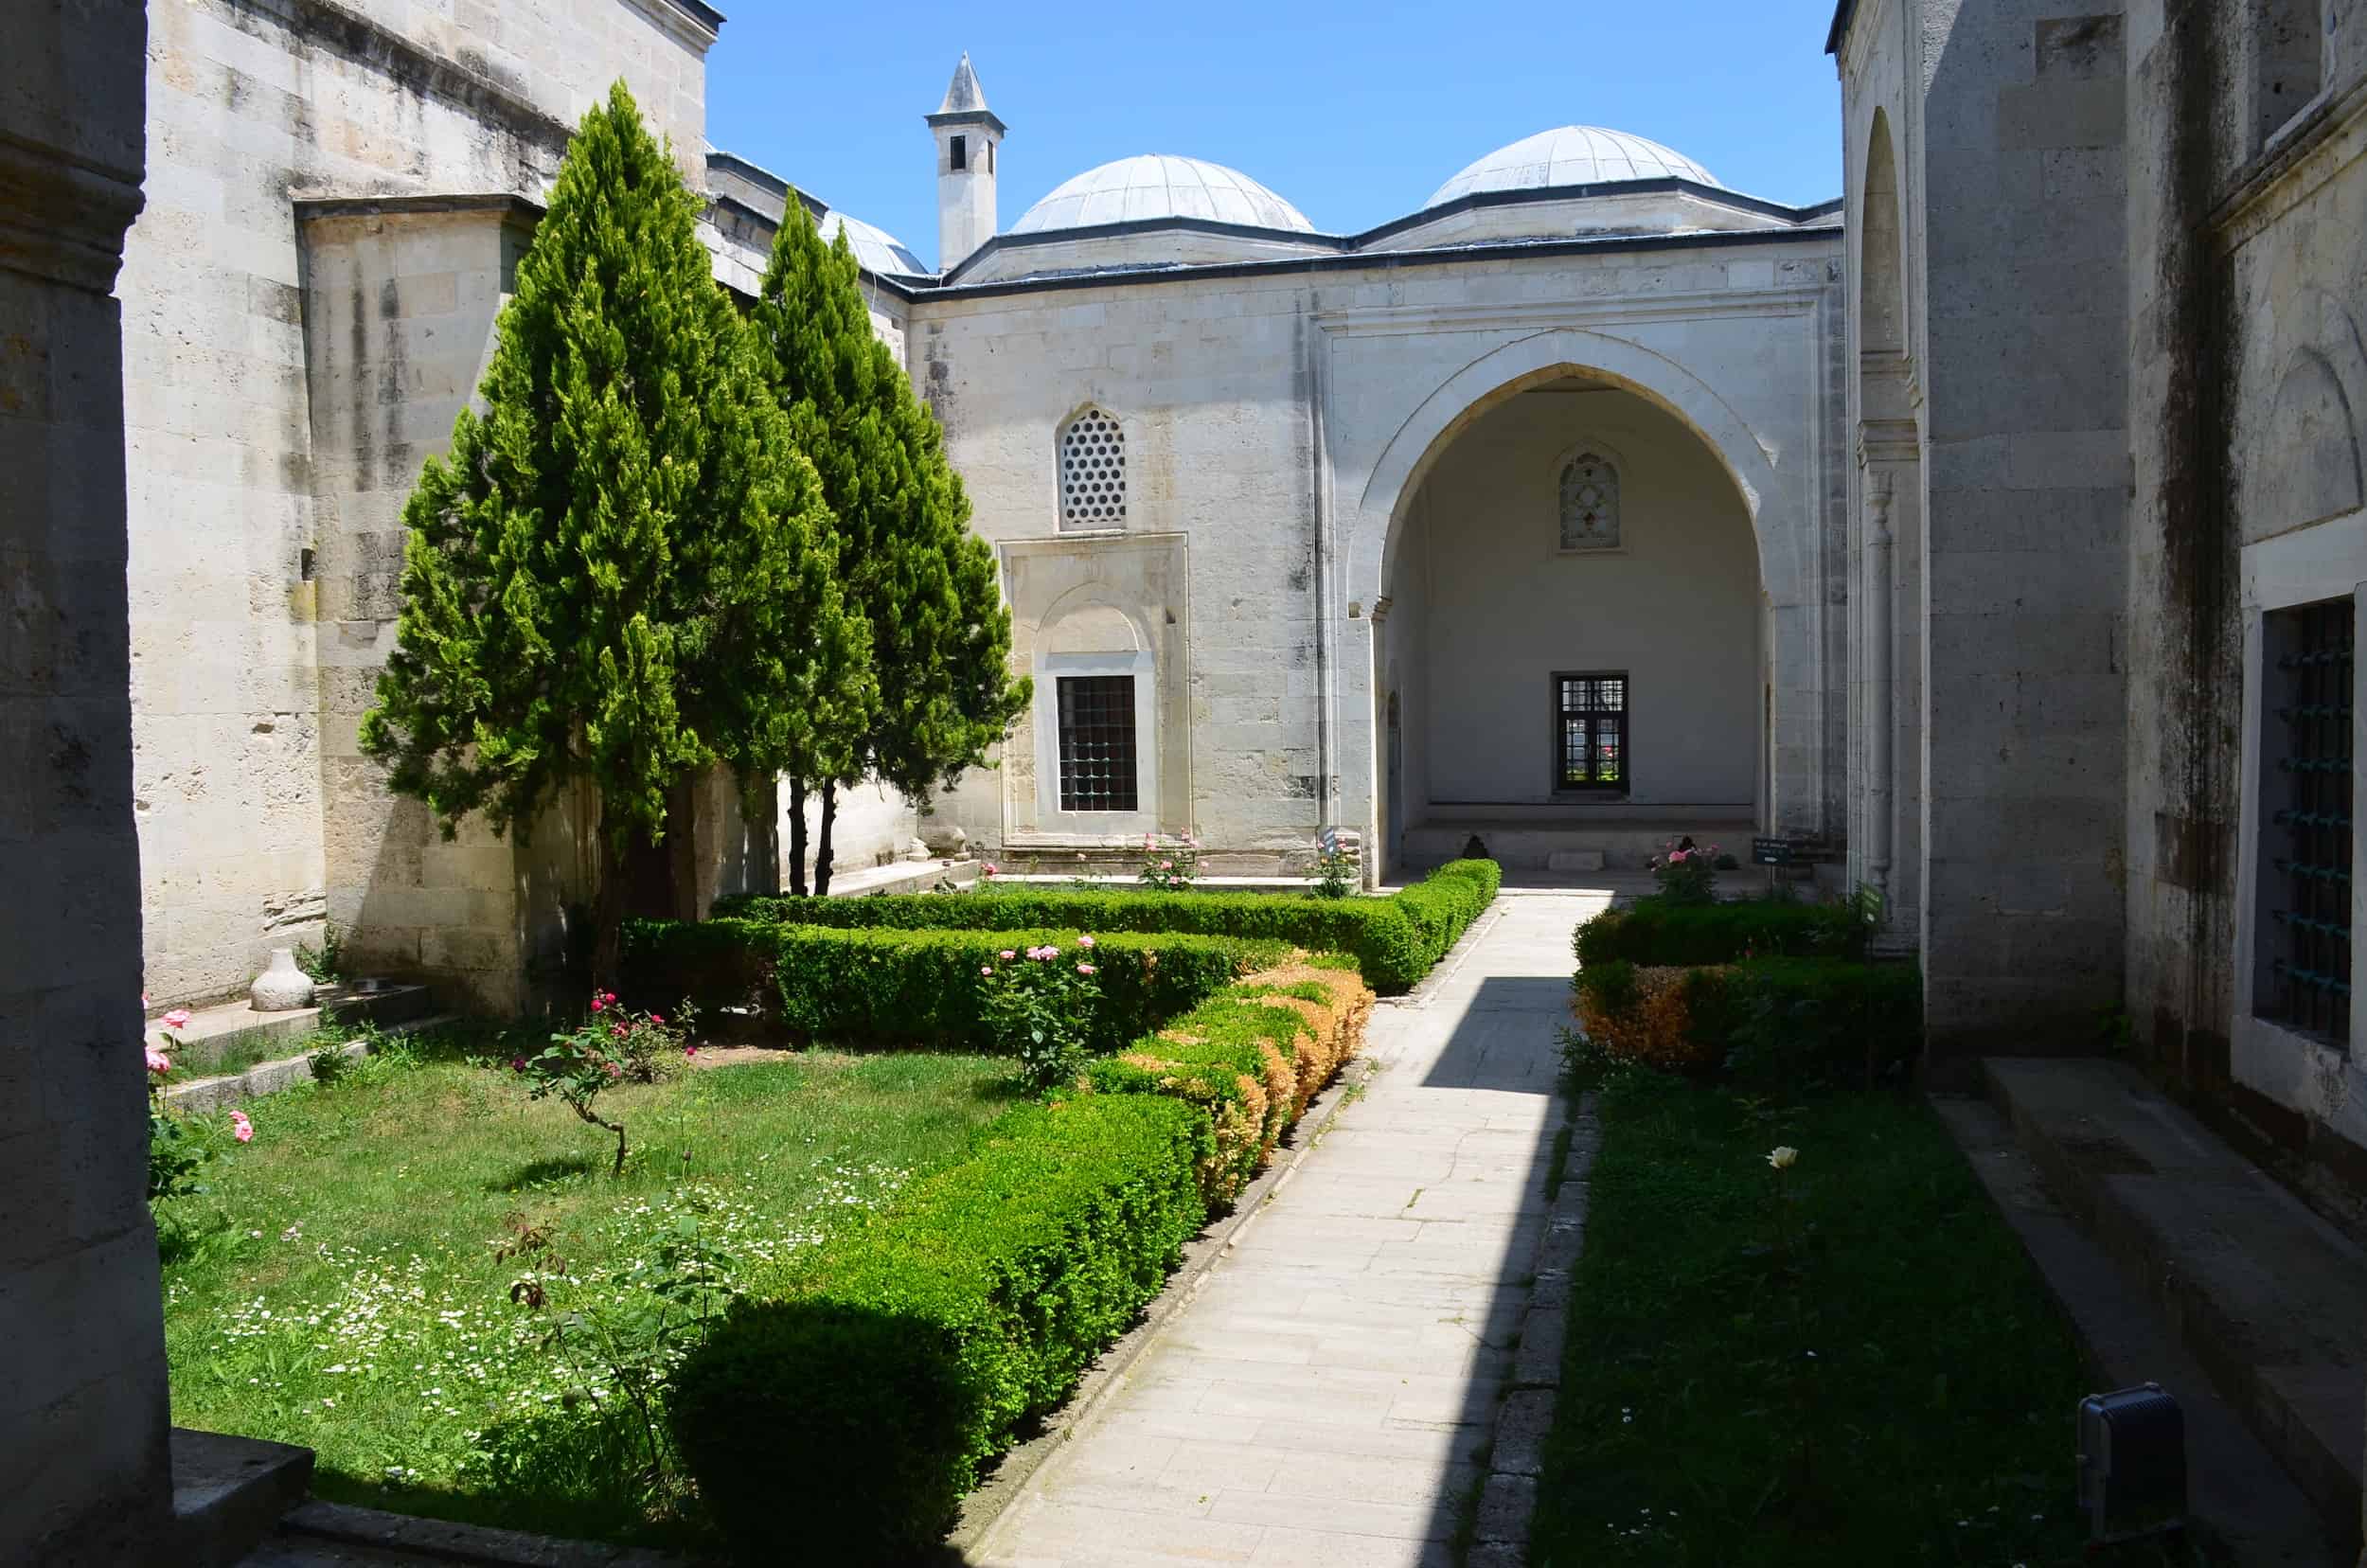 Second Courtyard at the Complex of Bayezid II Health Museum in Edirne, Turkey